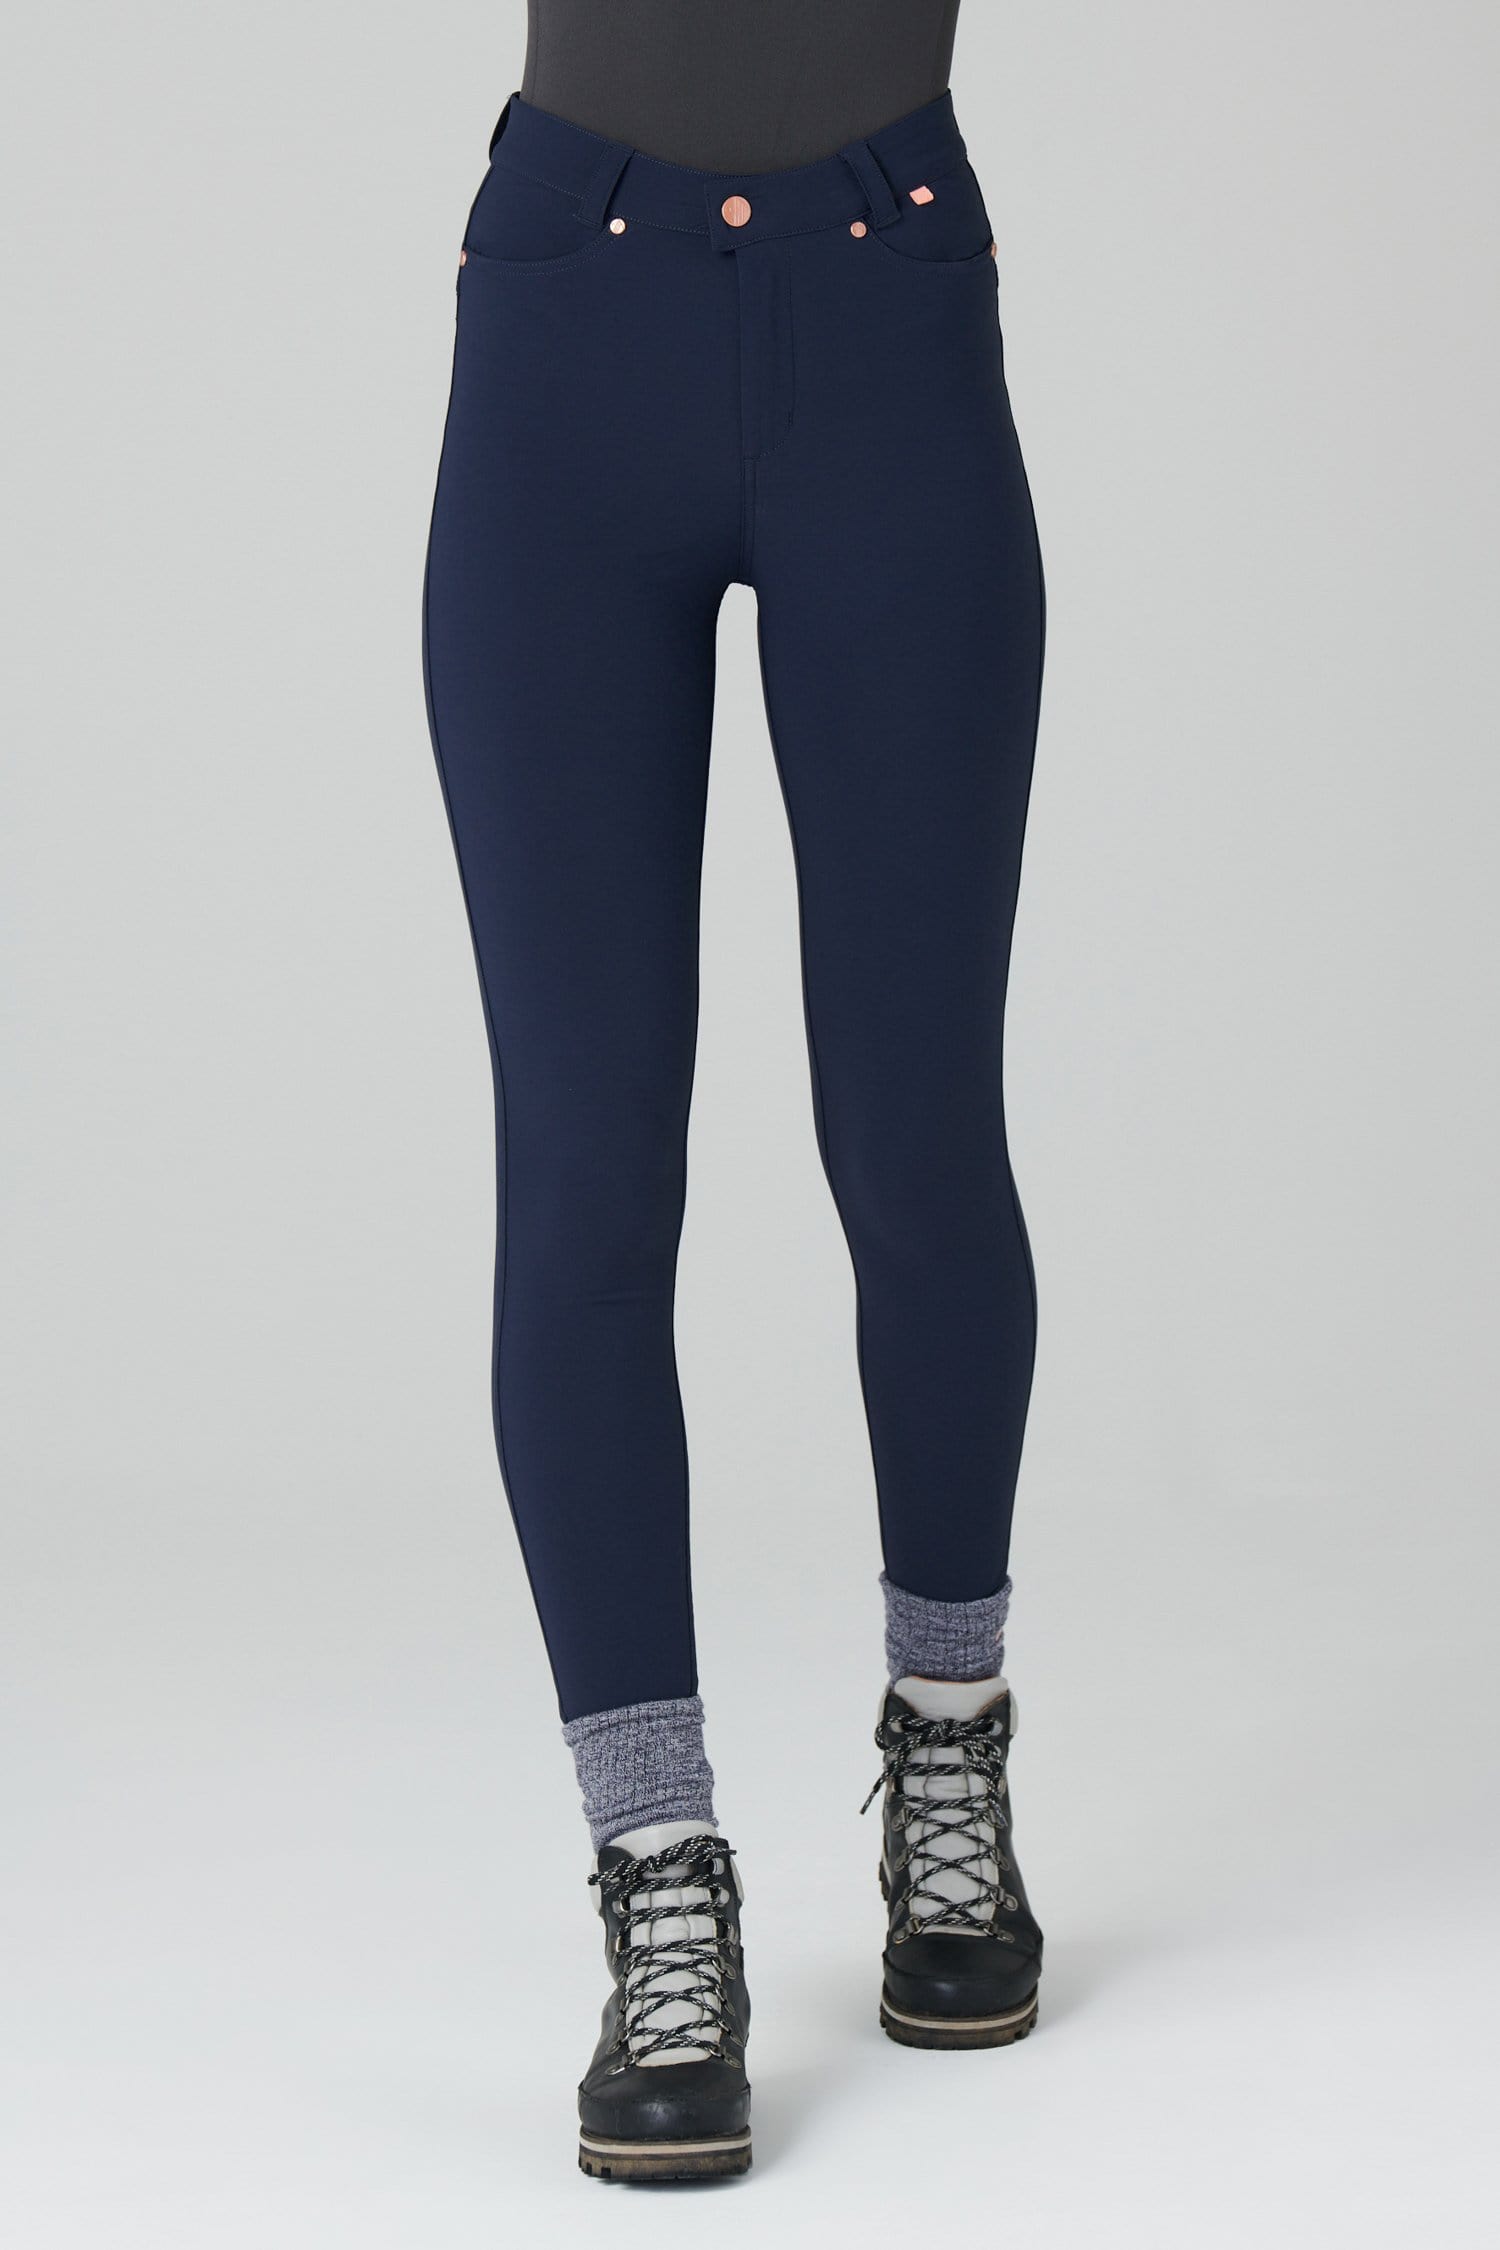 Max Stretch Skinny Outdoor Trousers - Deep Navy - 30xl / Uk12 - Womens - Acai Outdoorwear